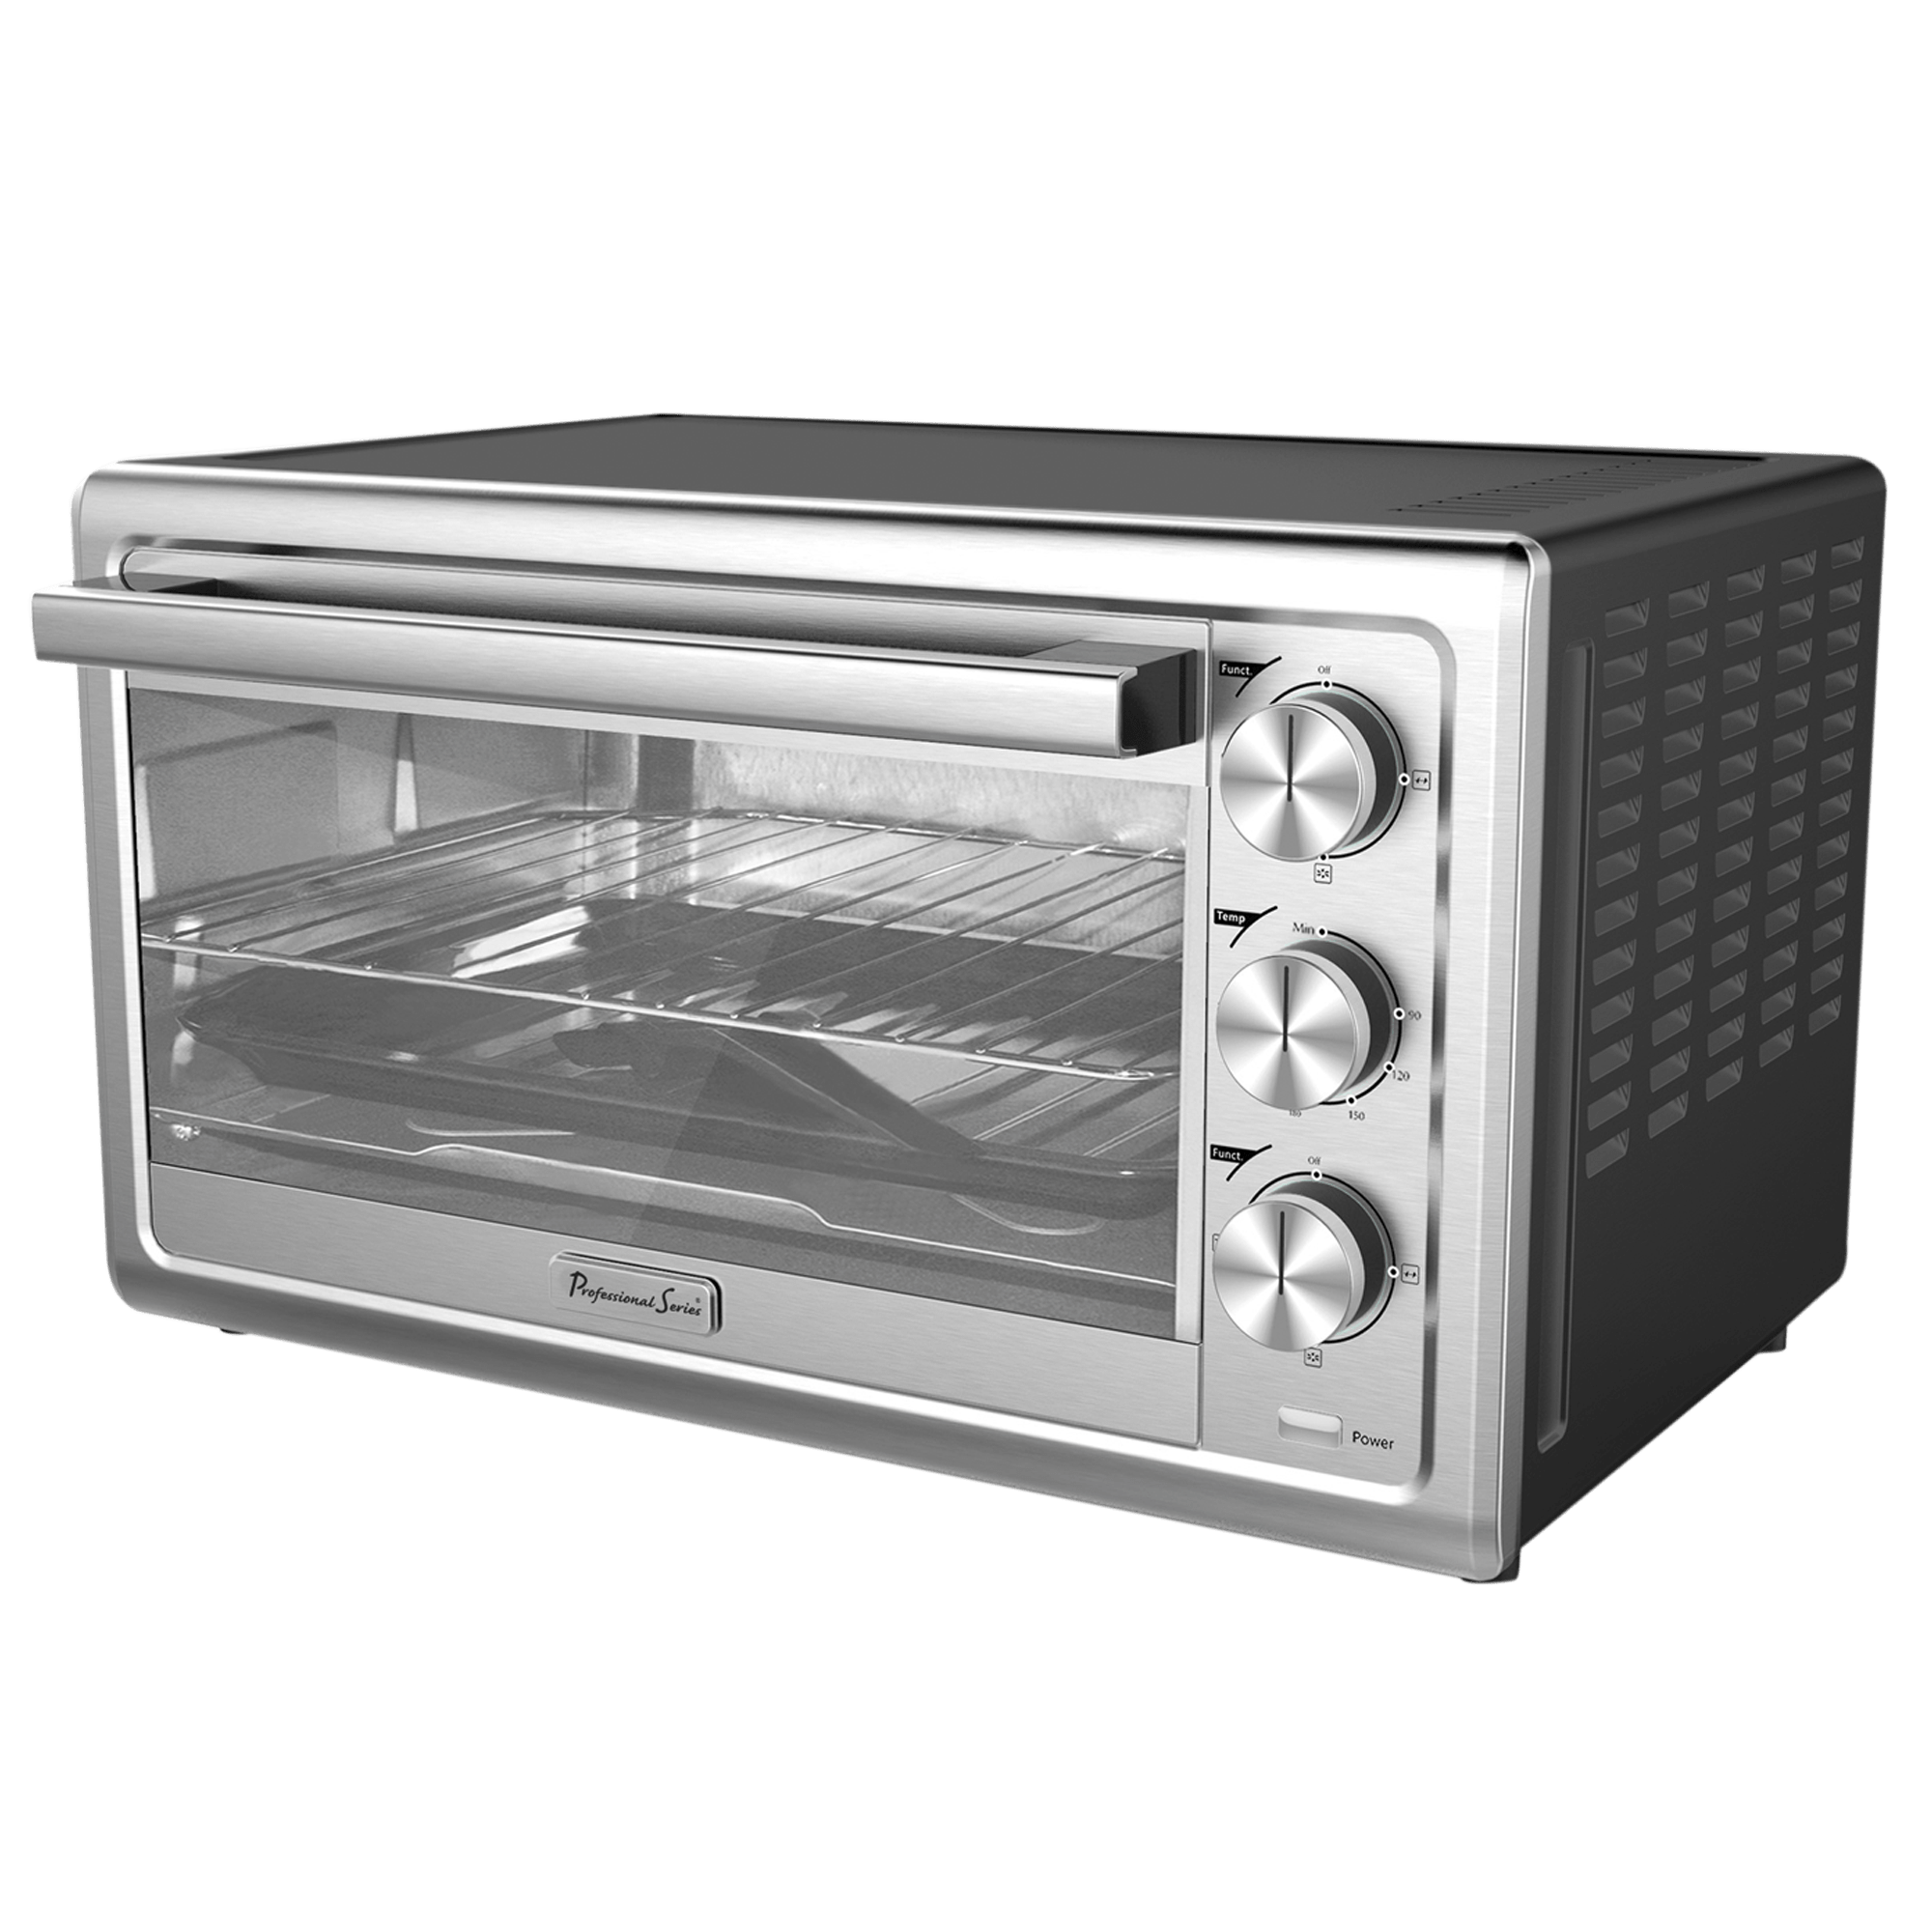 What to Look for When Buying a Toaster - Professional Series